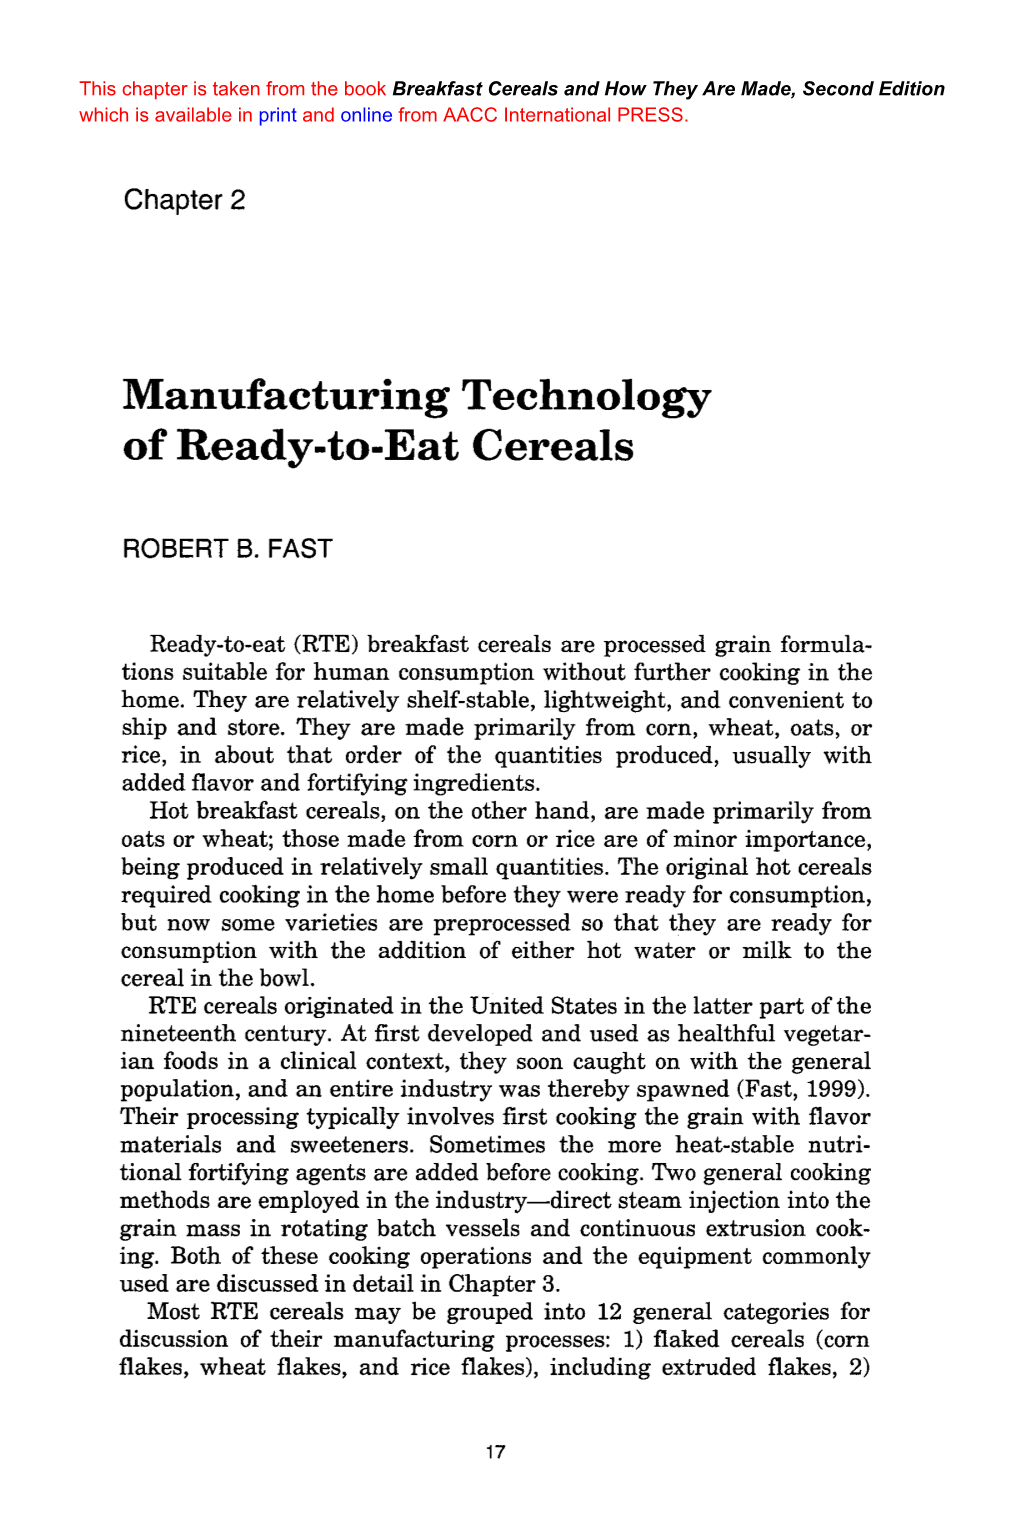 Manufacturing Technology of Ready-To-Eat Cereals